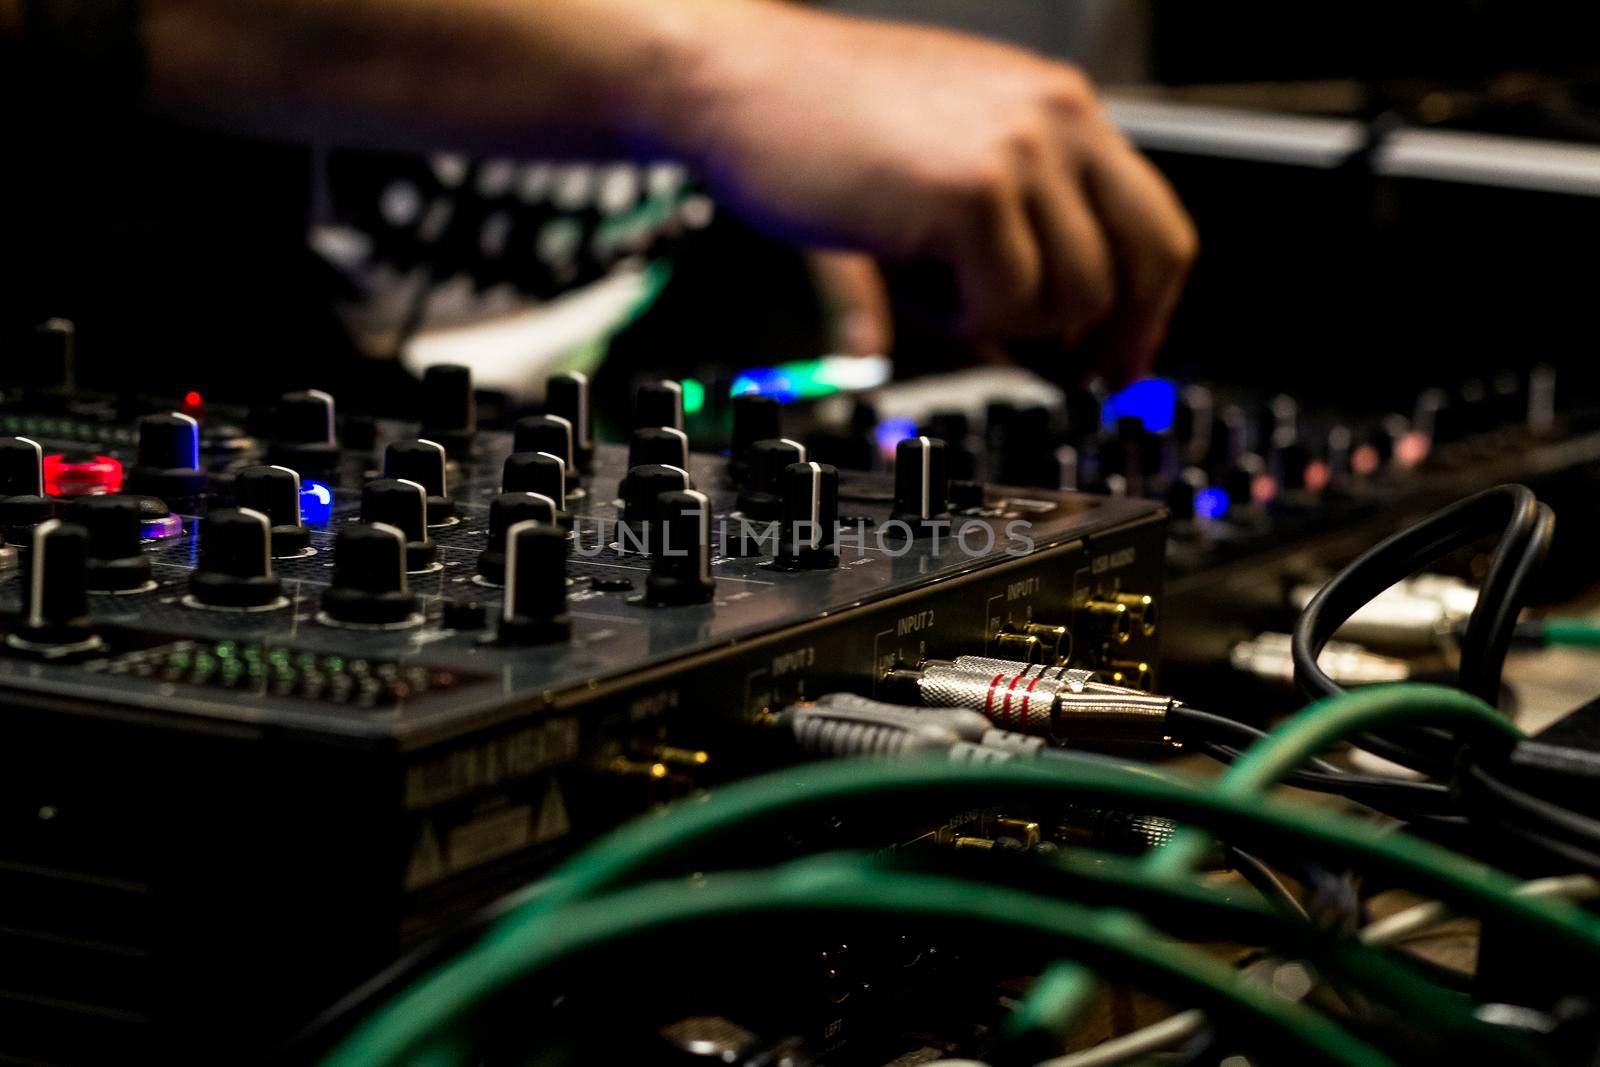 The dj uses the mixer to create electronic music live.